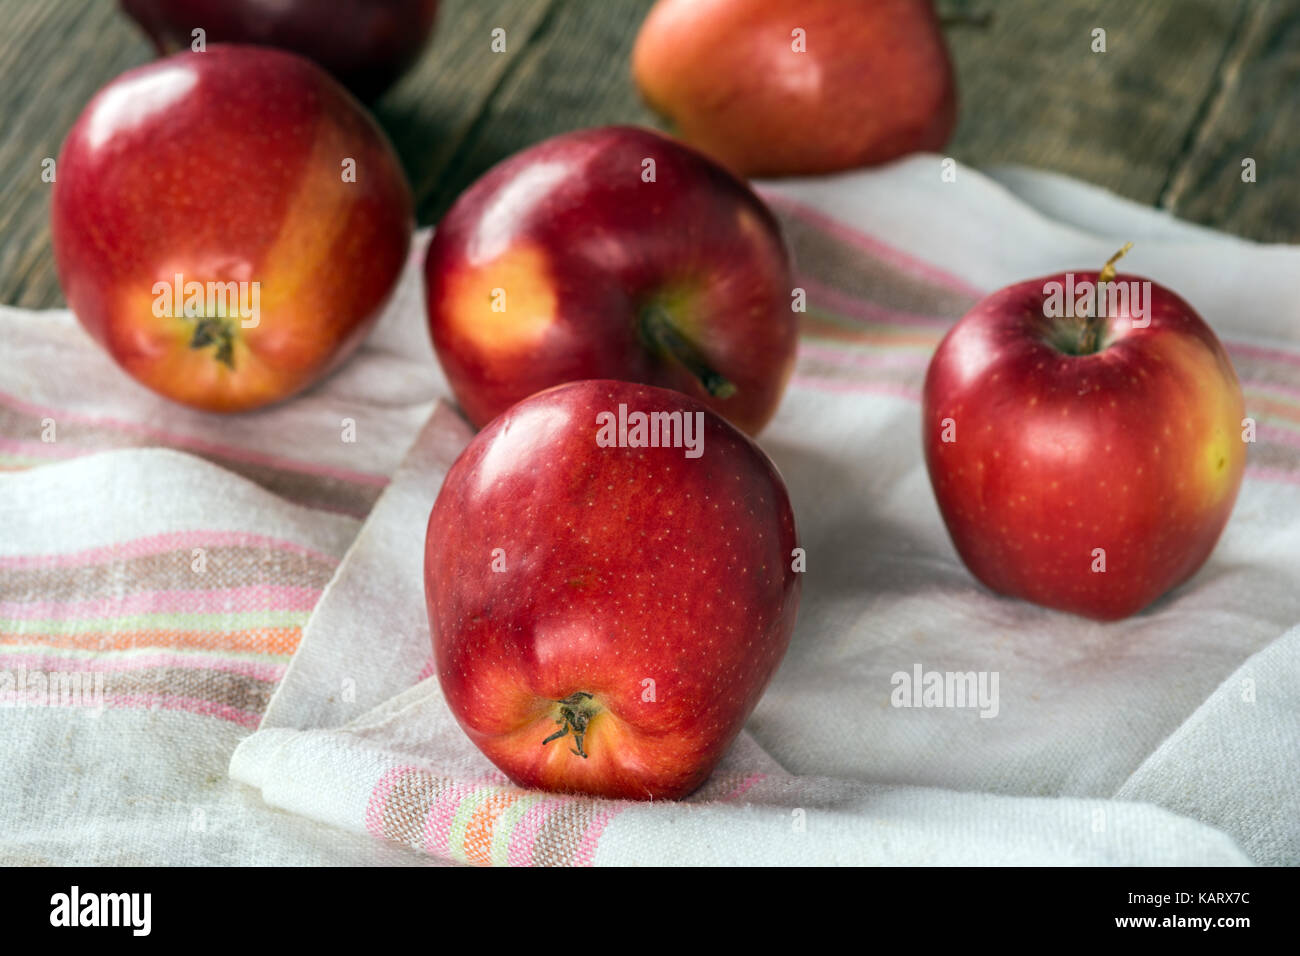 Ripe red apples on wooden surface Stock Photo